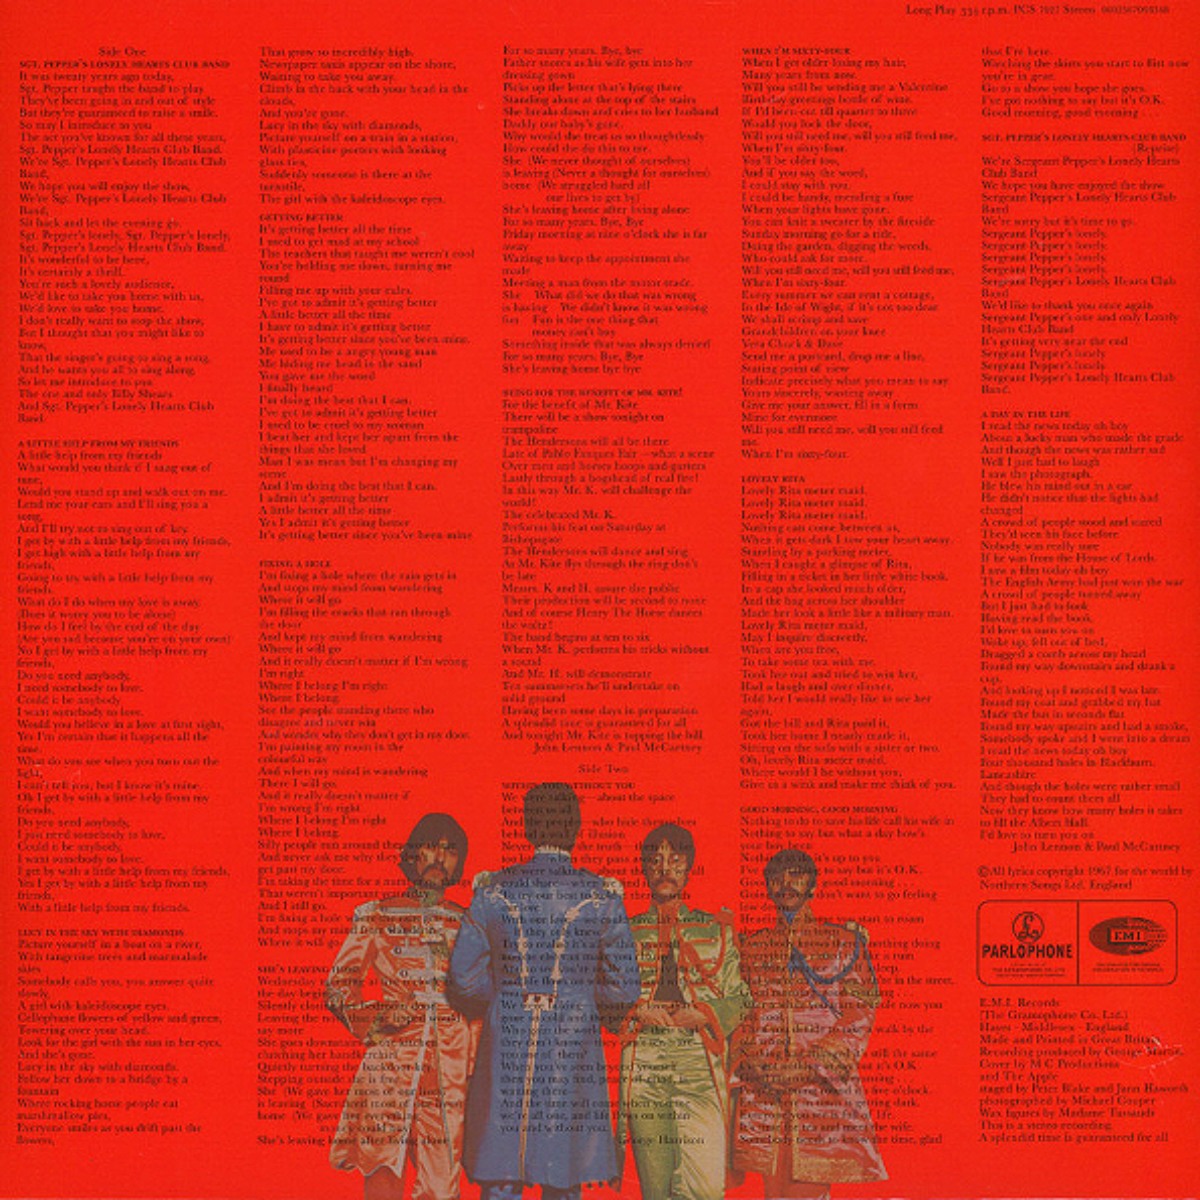 Cover of "Sgt. Pepper & #039;s Lonely Hearts Club Band" by The Beatles, back side